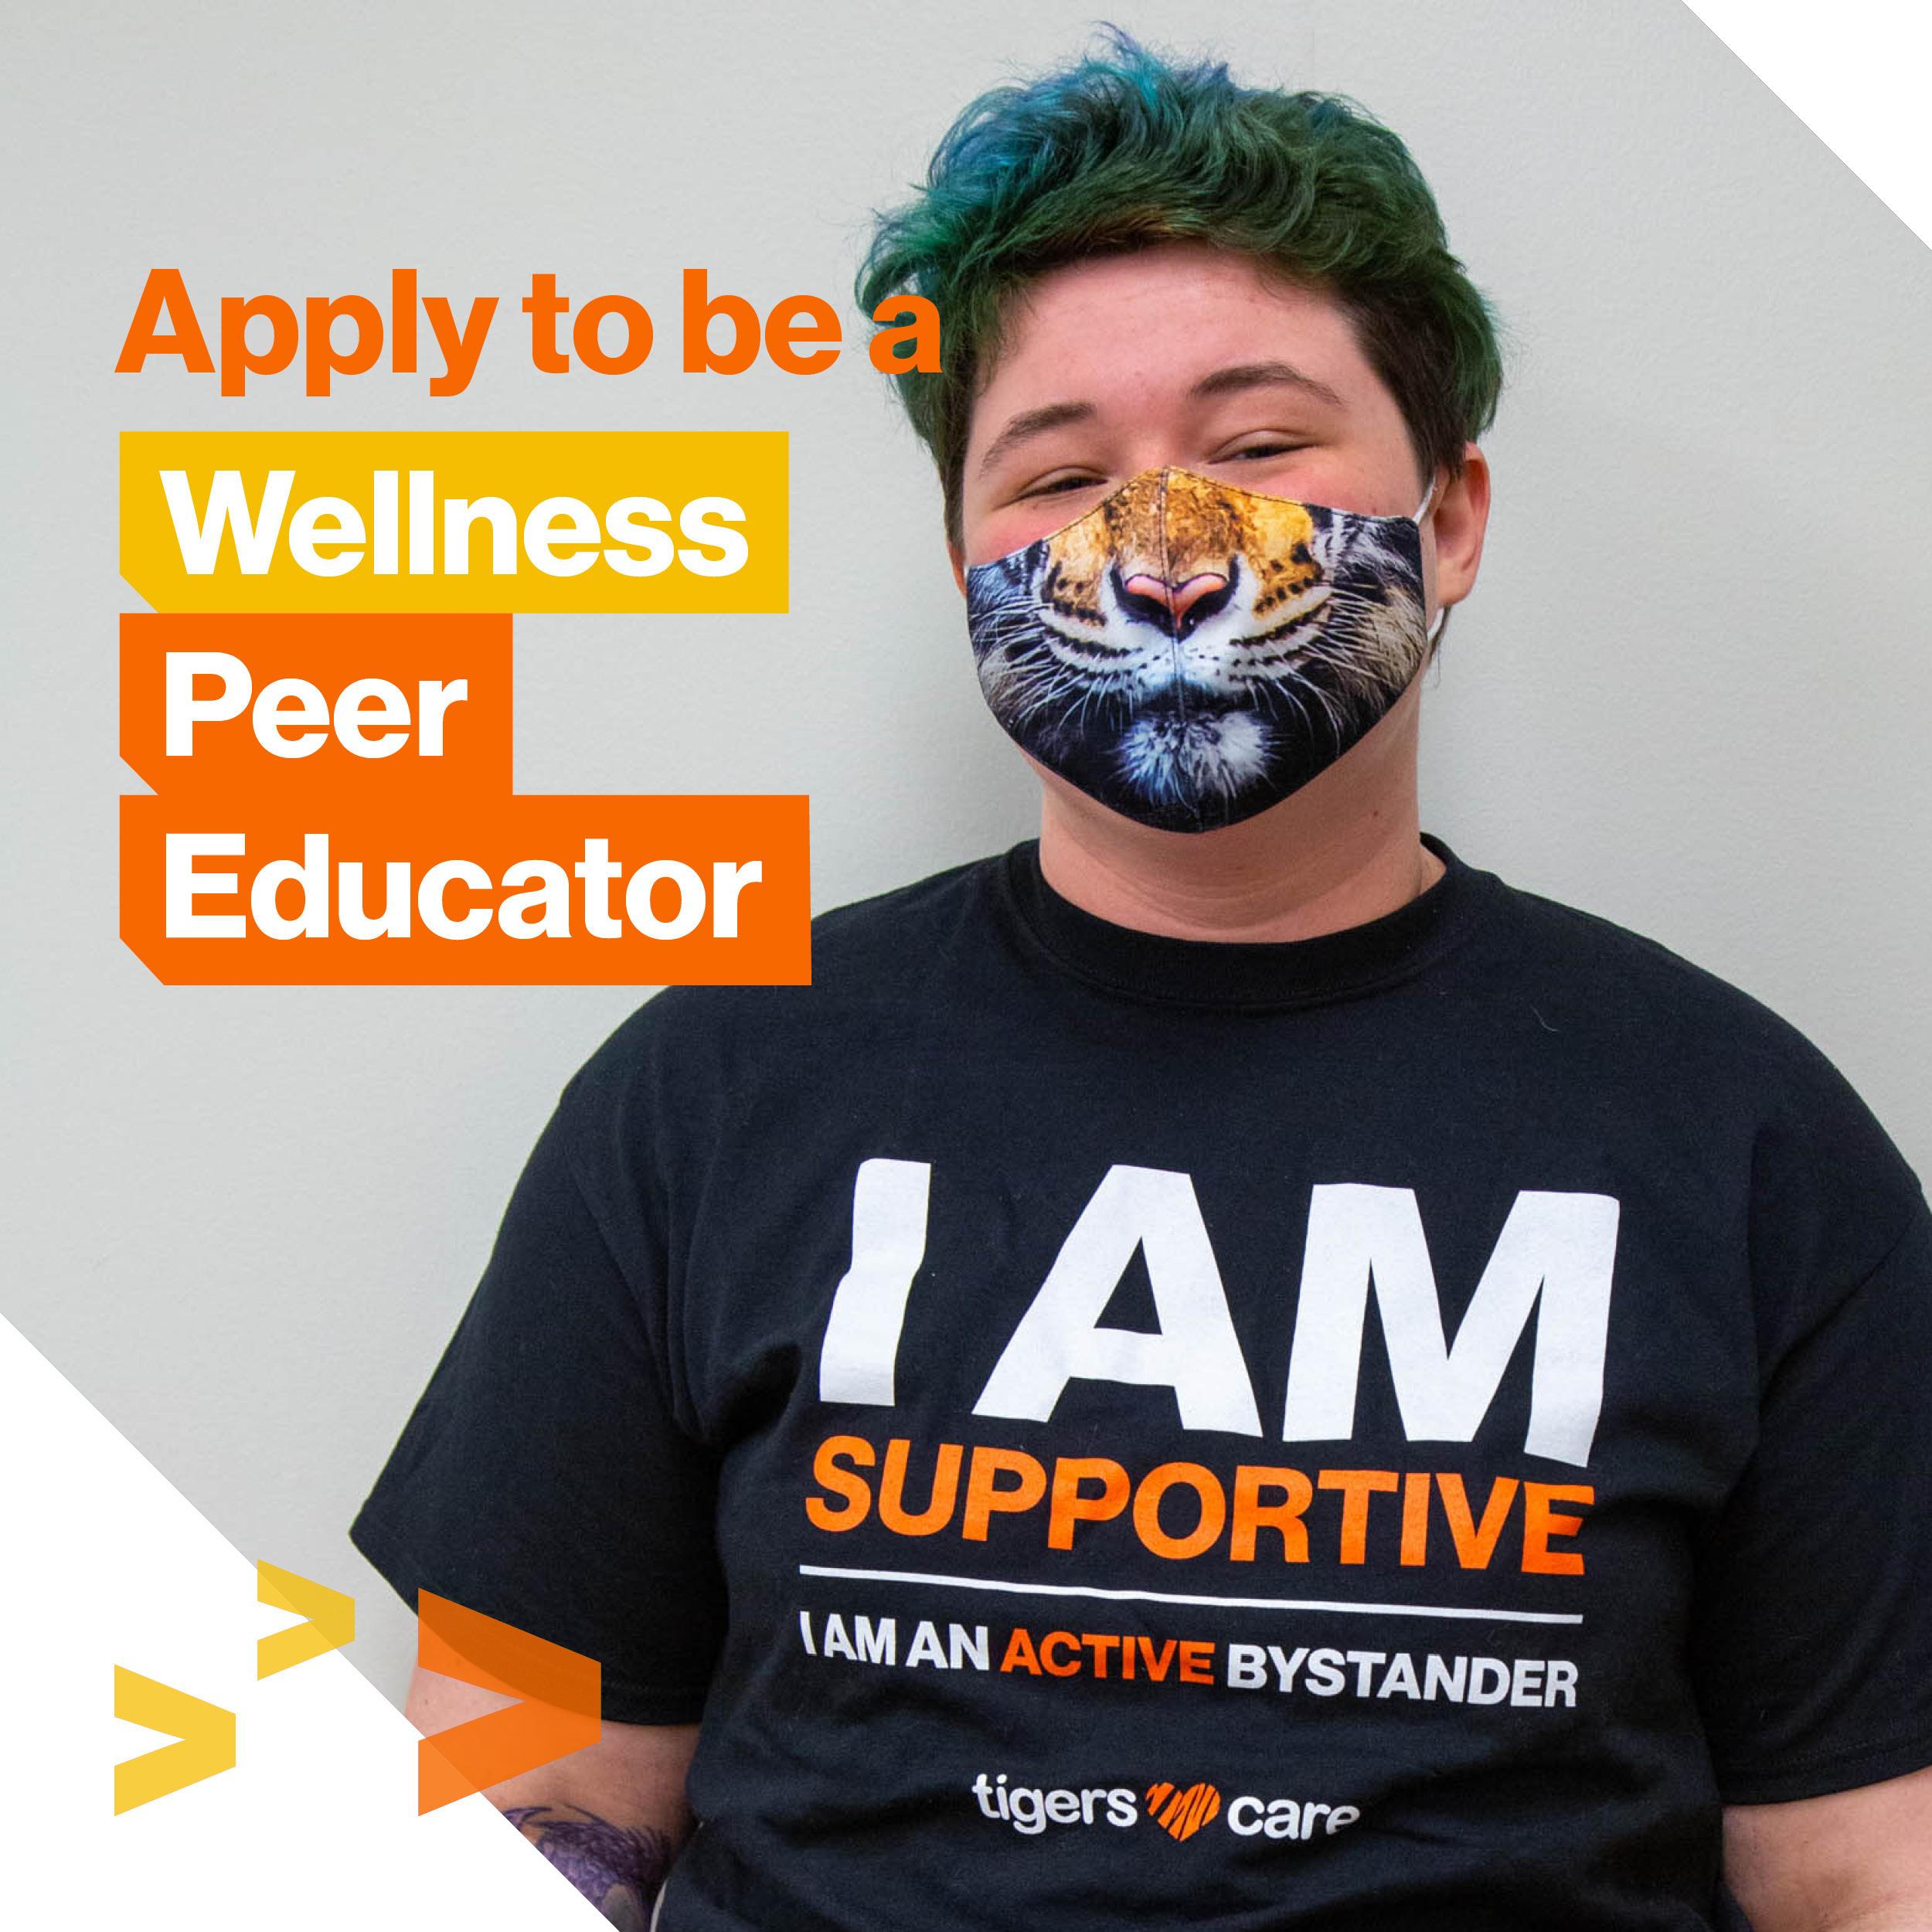 One student wearing a tiger mask and Wellness Peer Educator t-shirt with Apply to be a Wellness Peer Educator text